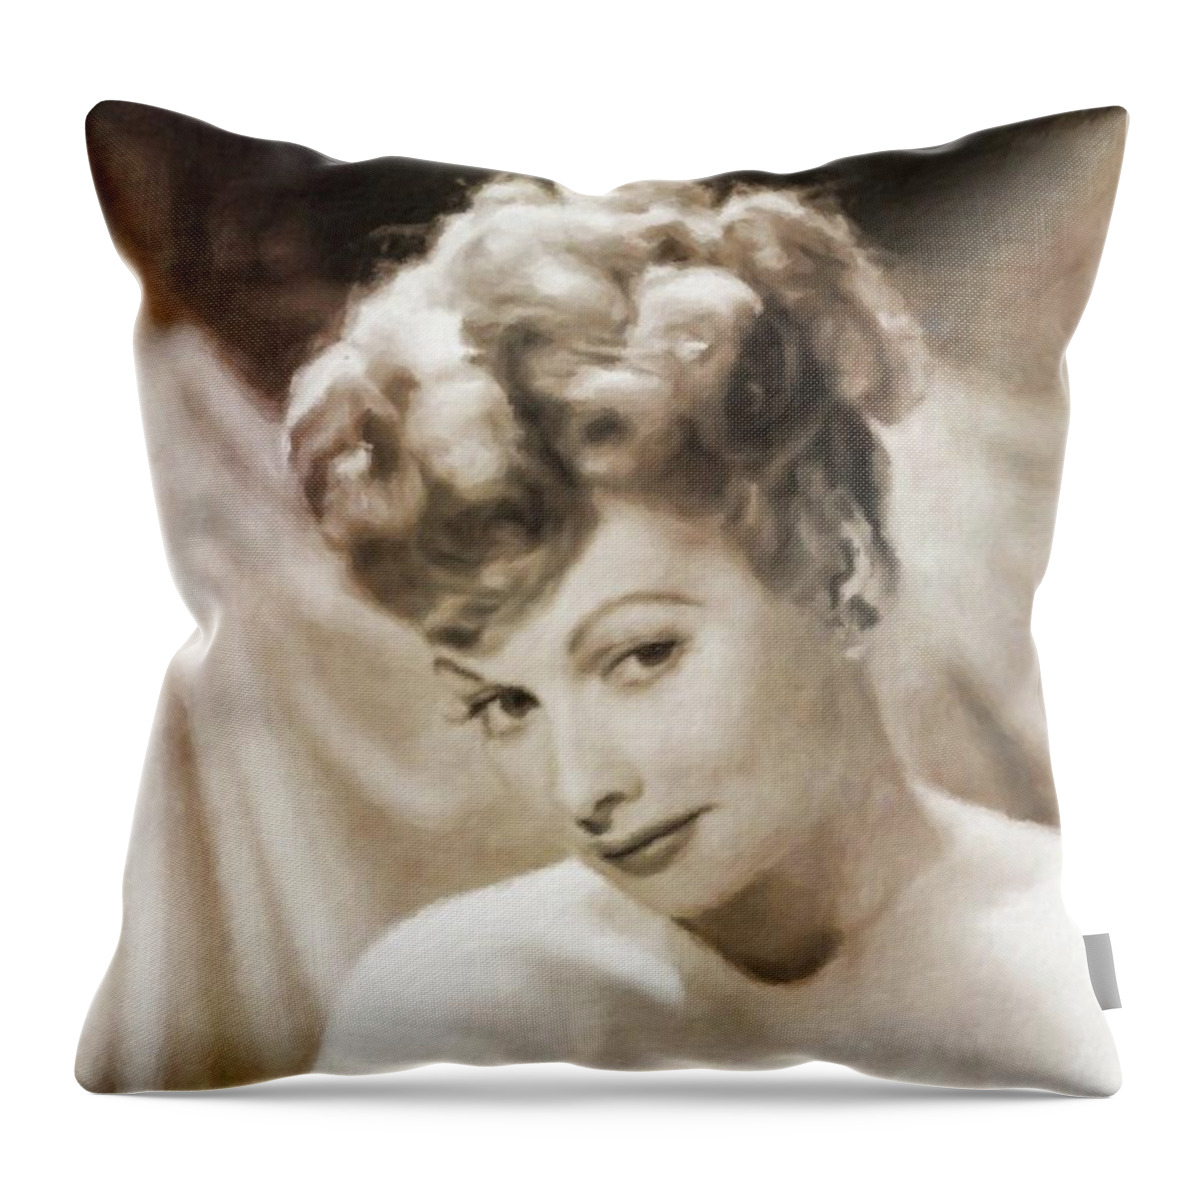 Hollywood Throw Pillow featuring the painting Lucille Ball by Mary Bassett #1 by Esoterica Art Agency